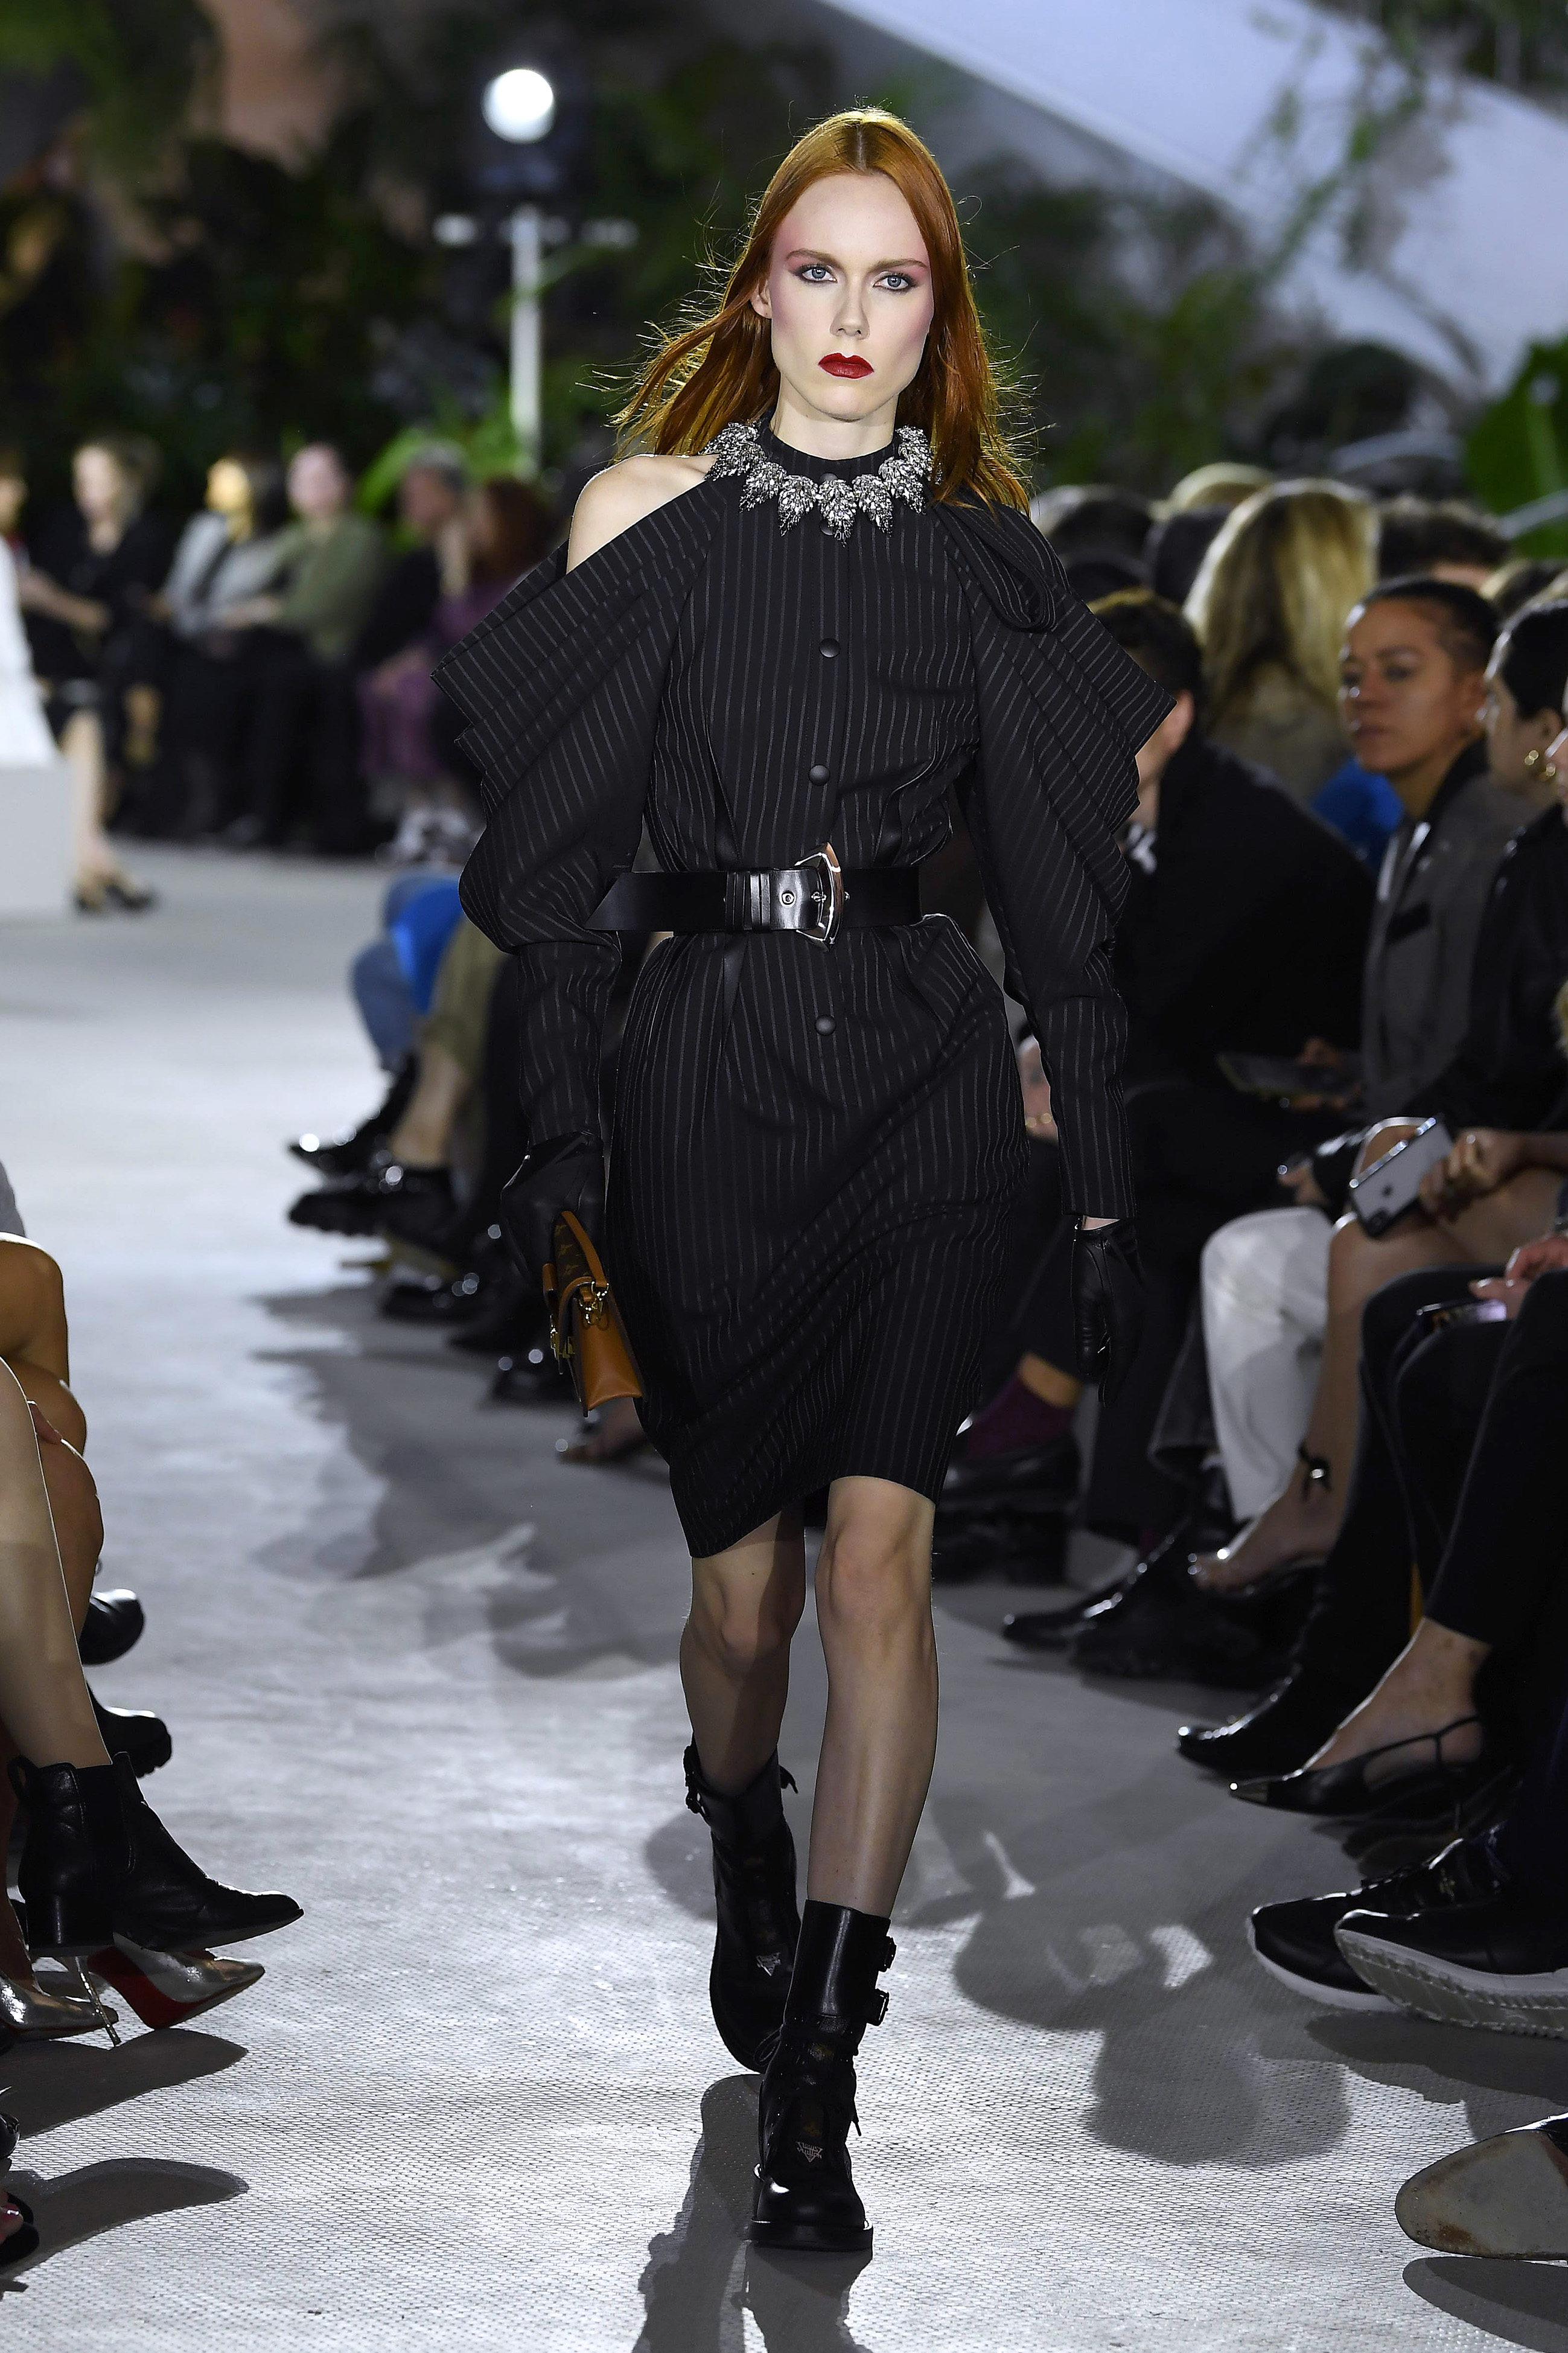 NEW YORK, NY – MAY 08: A model walks the runway during Louis Vuitton Cruise 2020 on May 8, 2019 in New York, USA. (Photo by Estrop/WireImage)